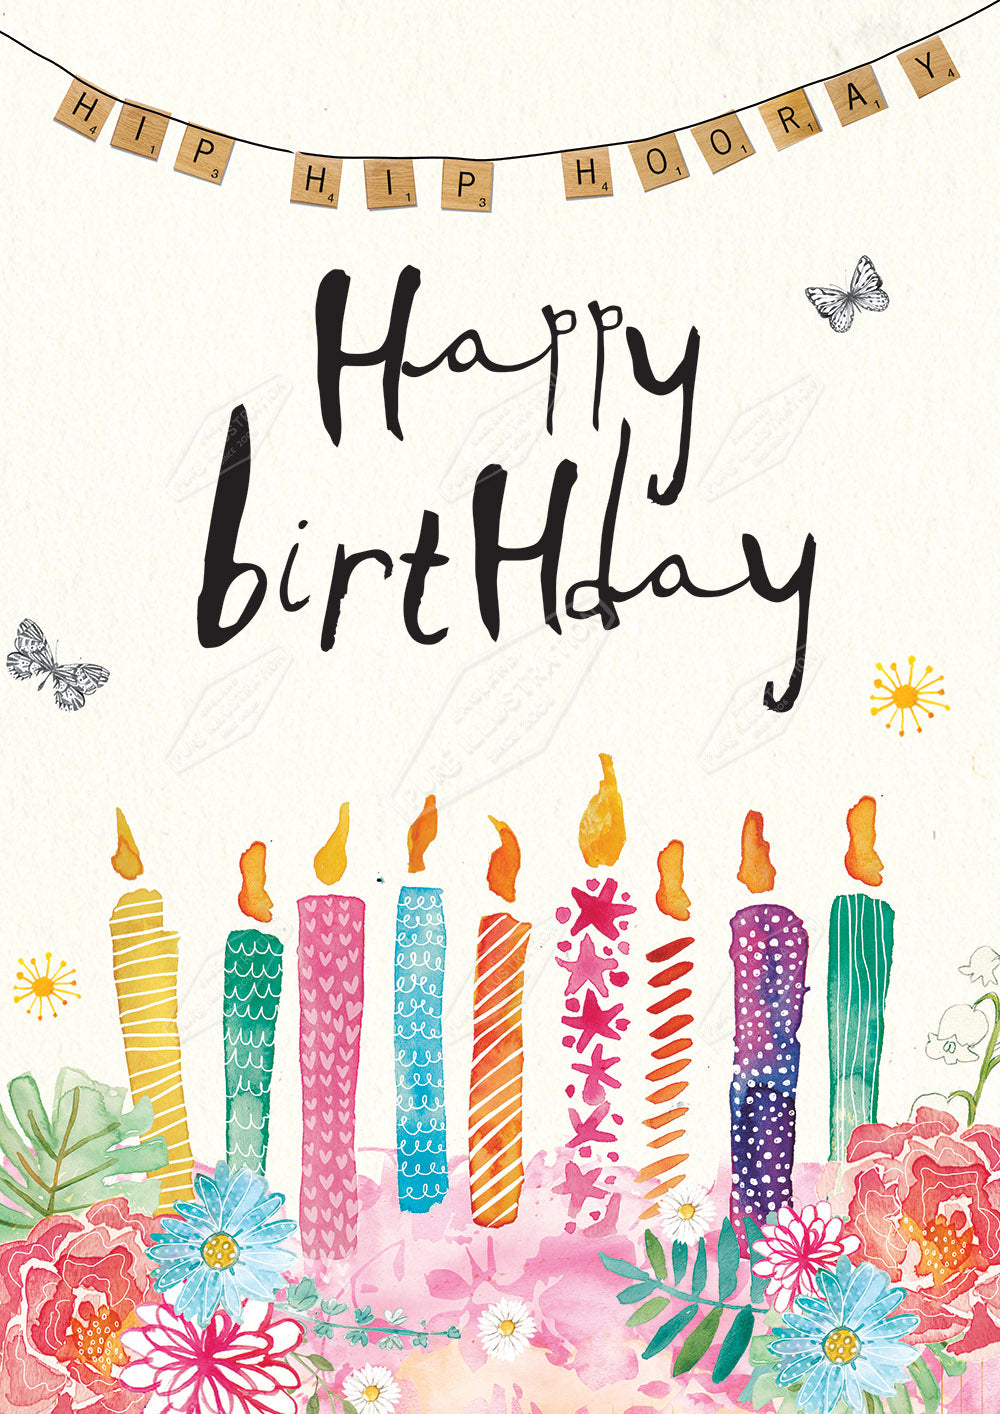 00028478EST- Emily Stalley is represented by Pure Art Licensing Agency - Birthday Greeting Card Design